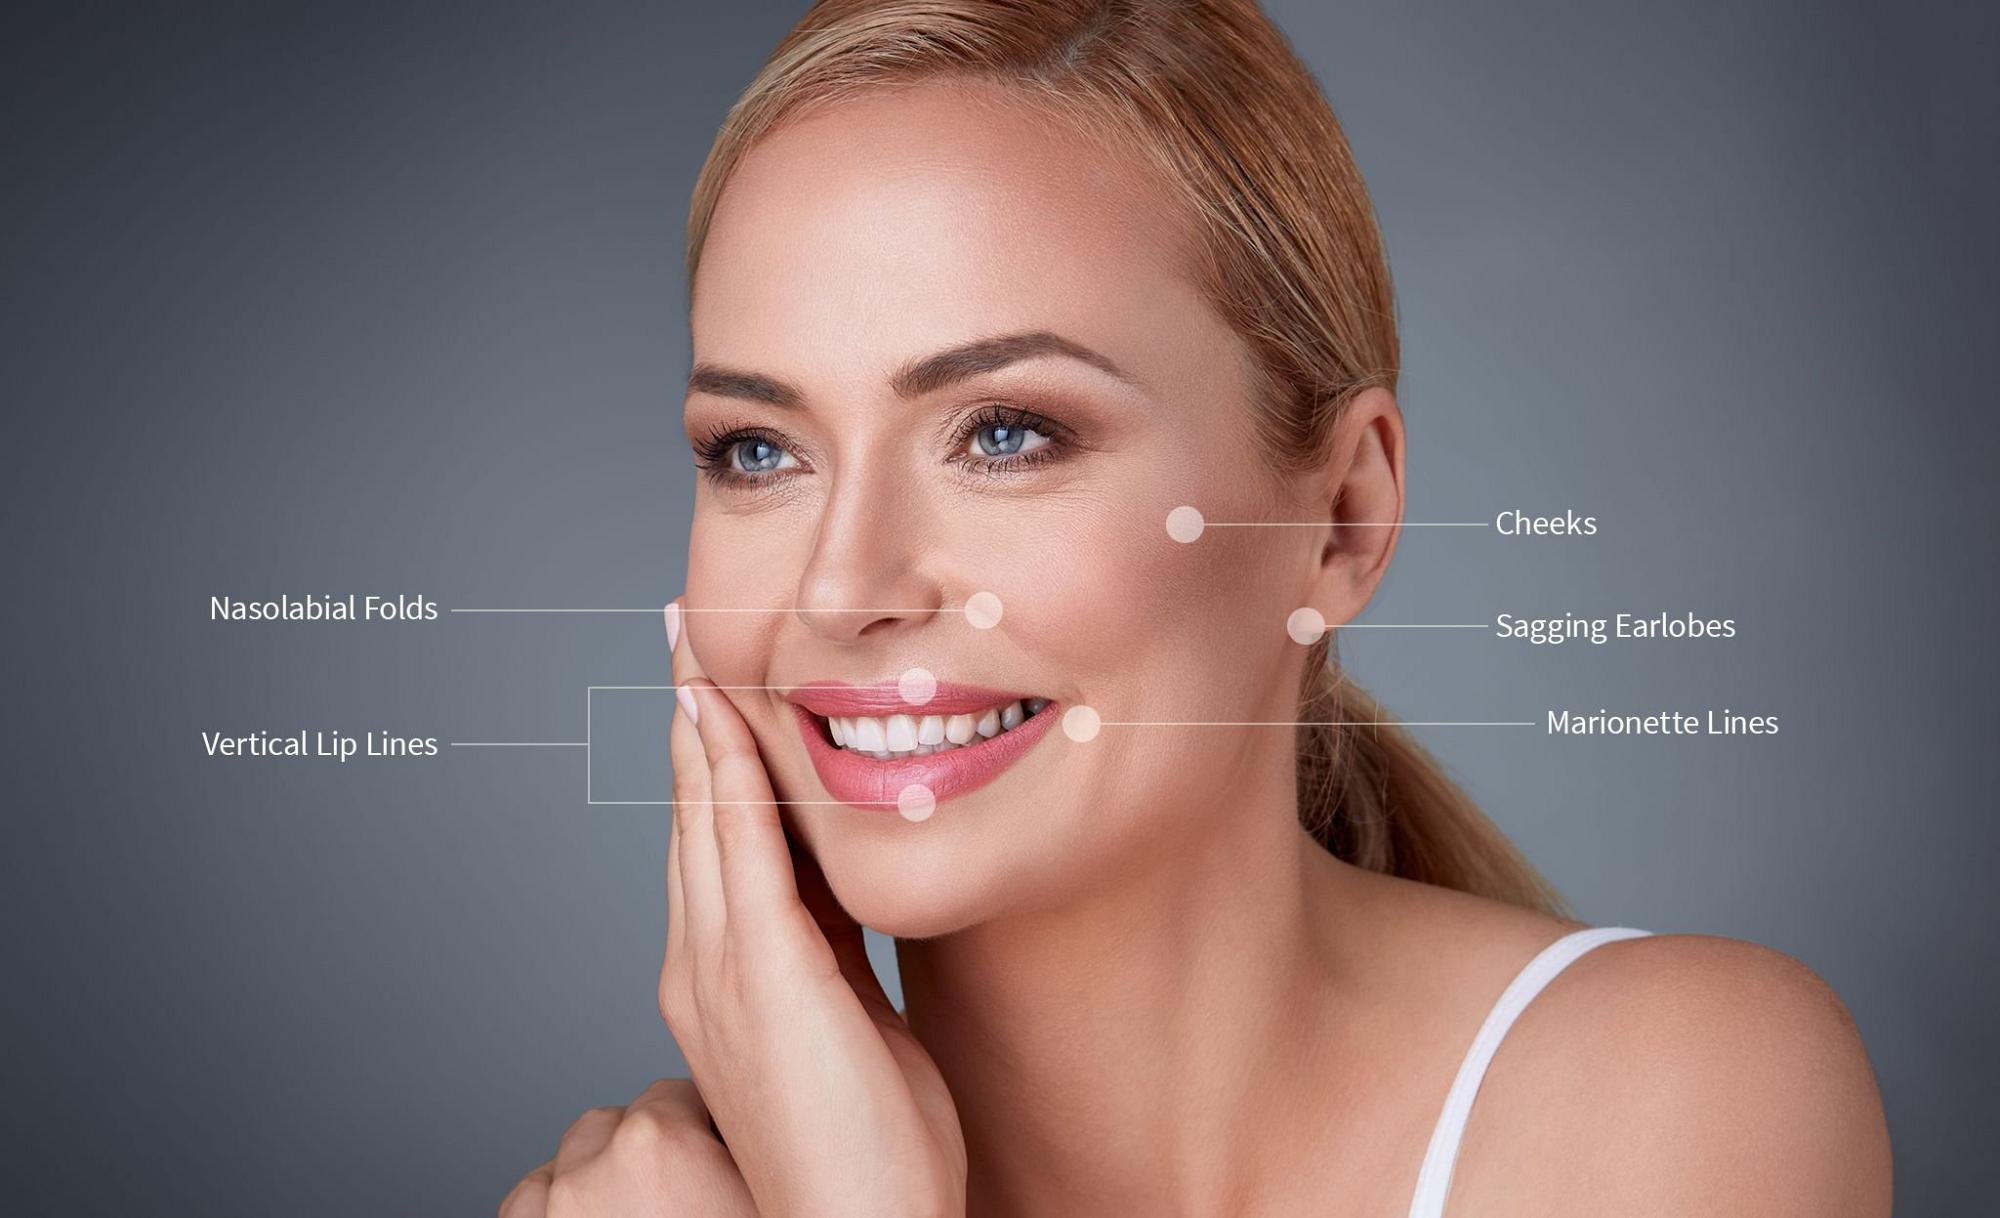 Woman smiling while tags identify where wrinkles occur on the face